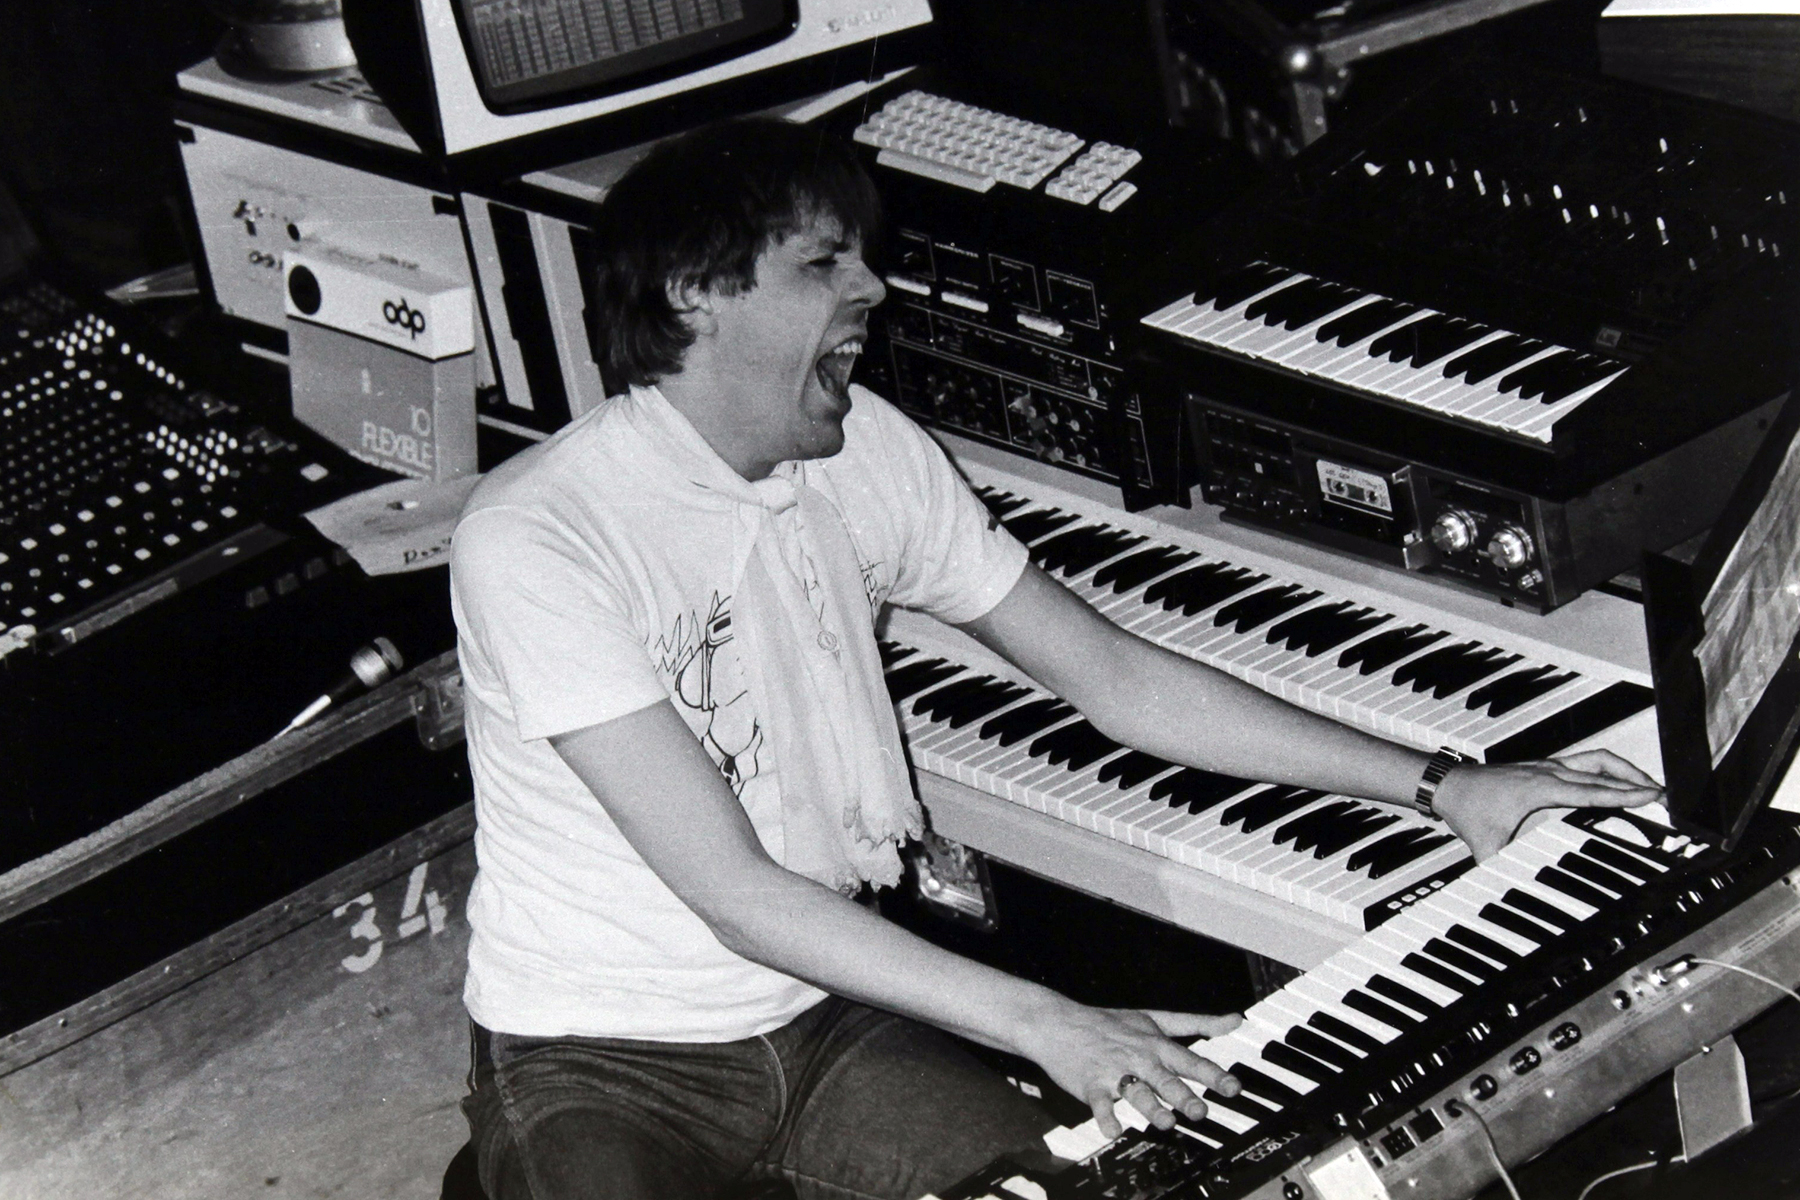 Klaus Schulze, Prolific Electronic Music Pioneer, Dead at 74